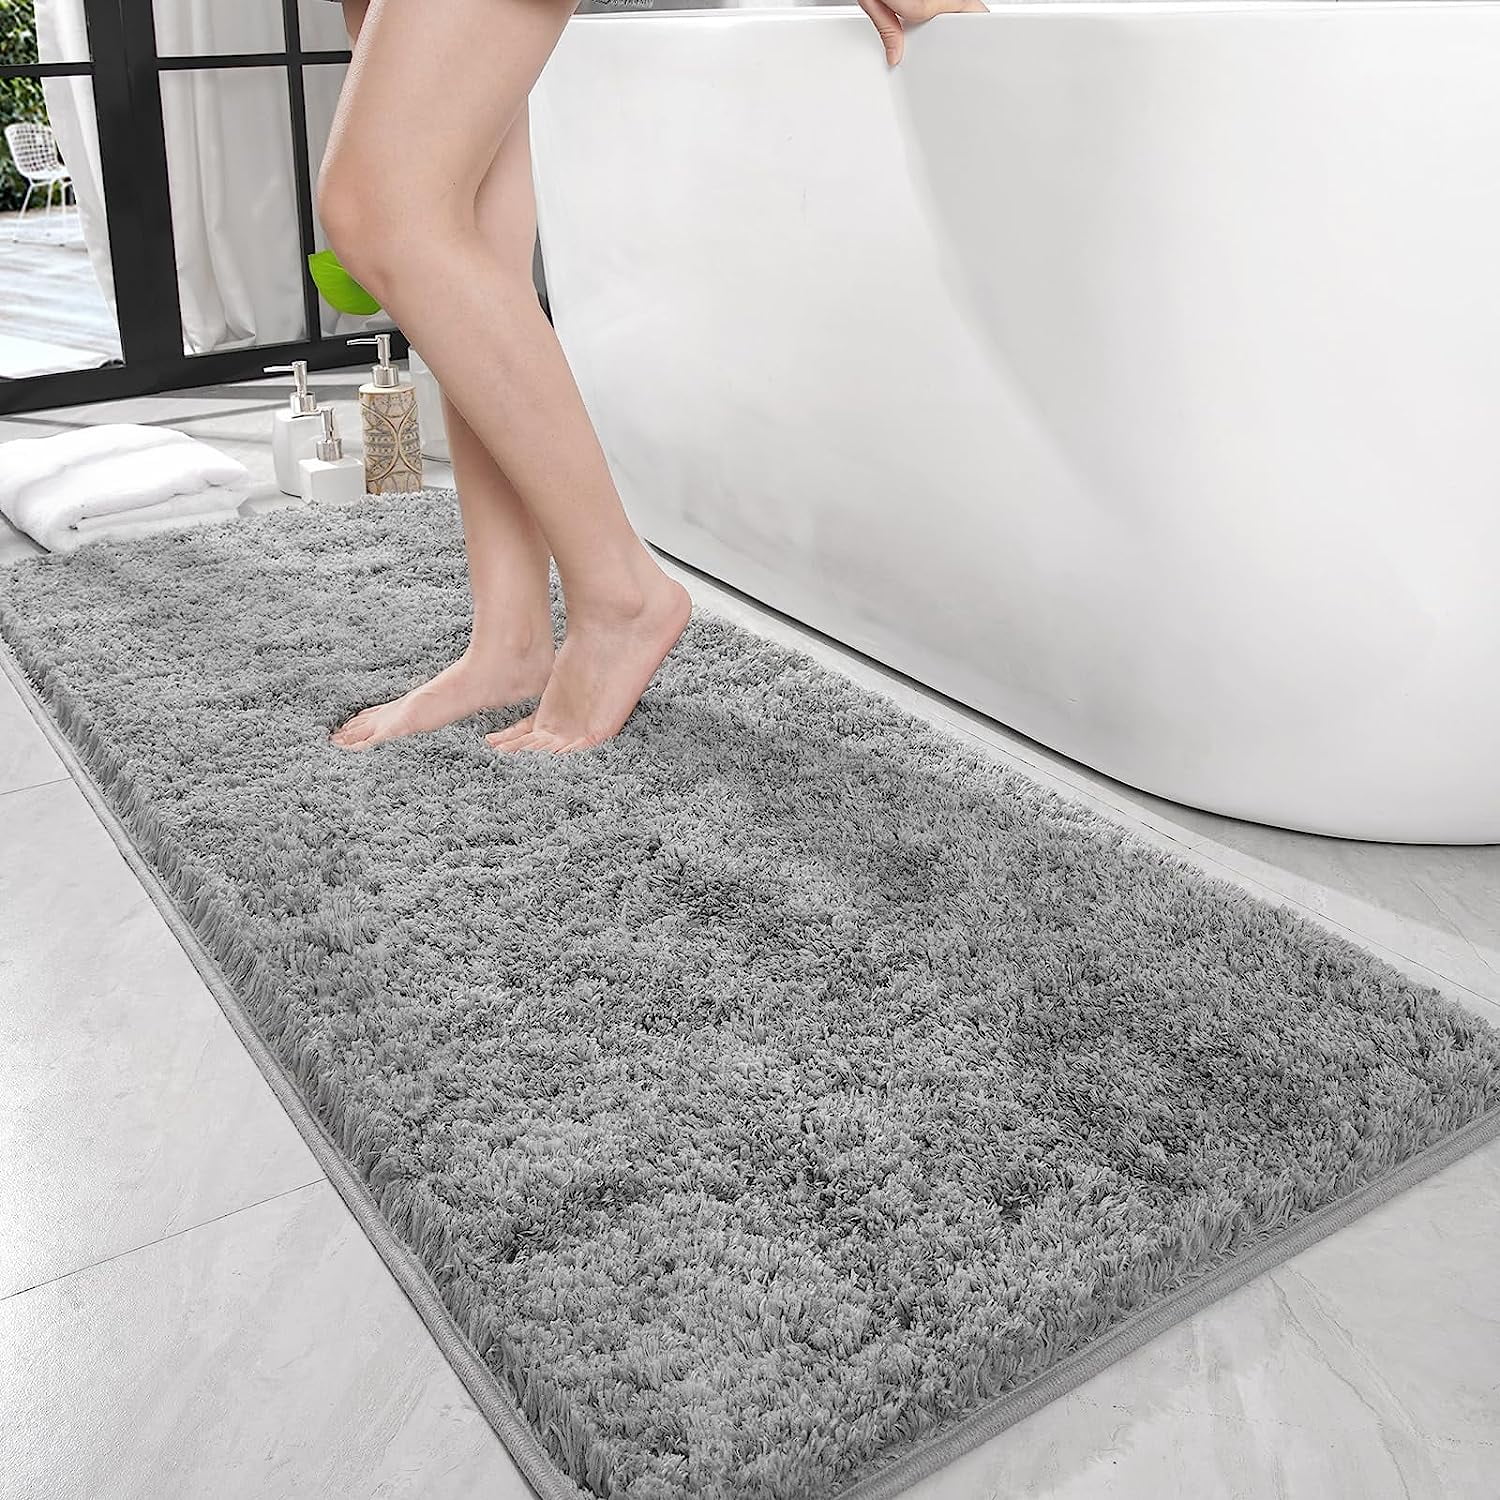 TSV Non-Slip Bathroom Rug Shag Shower Mat Machine-Washable Bath Mats with Water Absorbent Soft Microfibers Carpet, 24 x 15 Inches, Size: 40, Gray